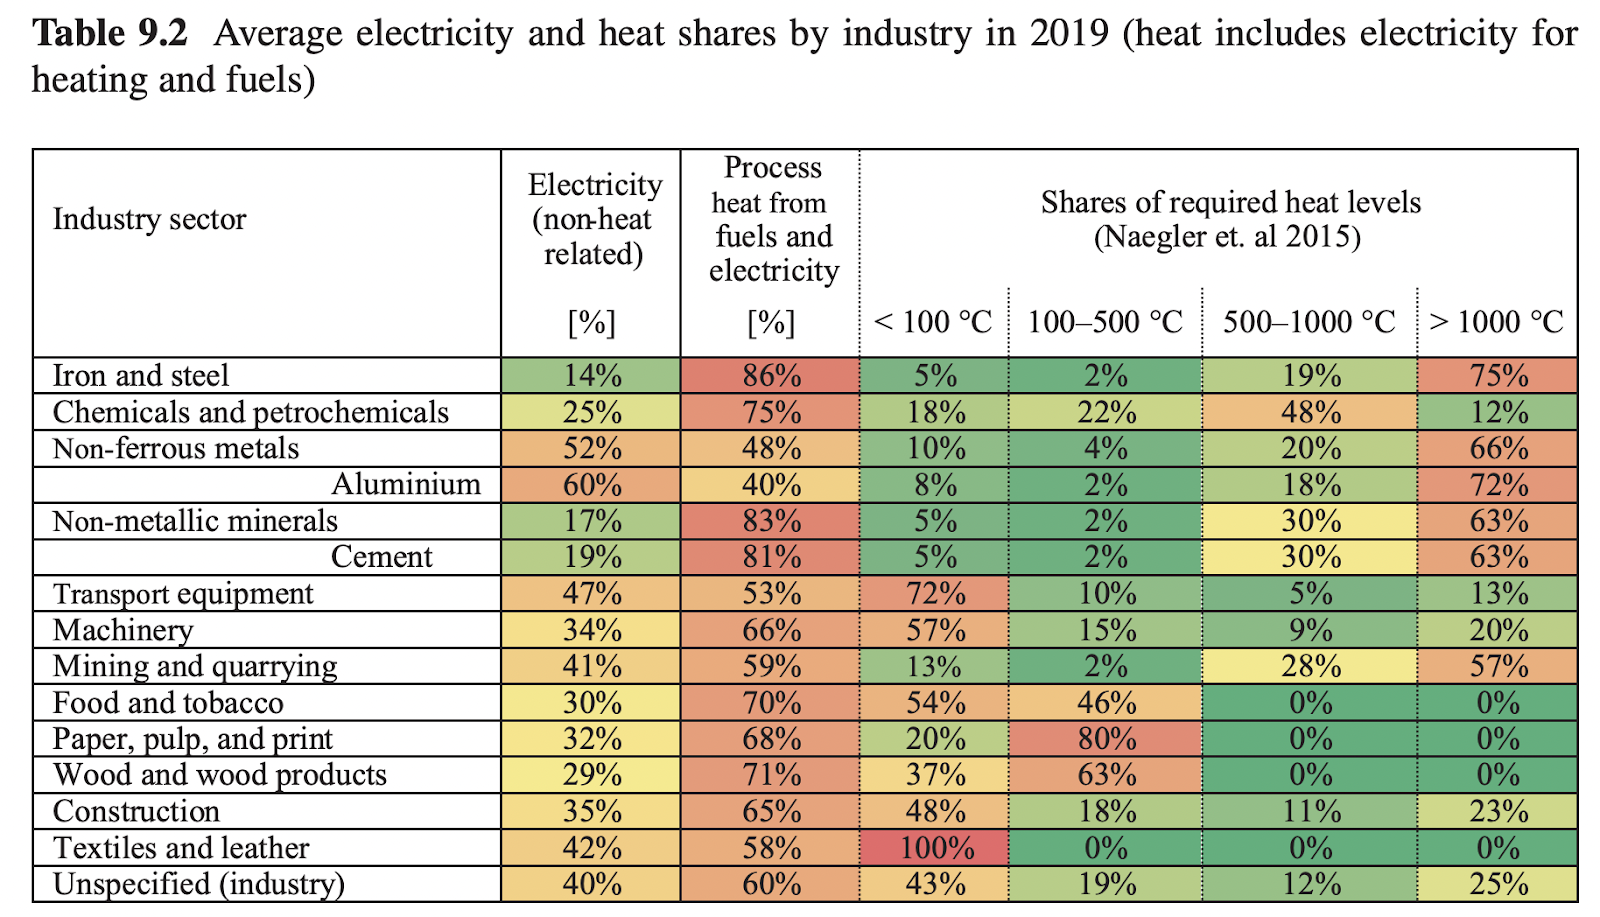 Average electricity and heat shares by industry in 2019 (heat includes electricity for heating and fuels).